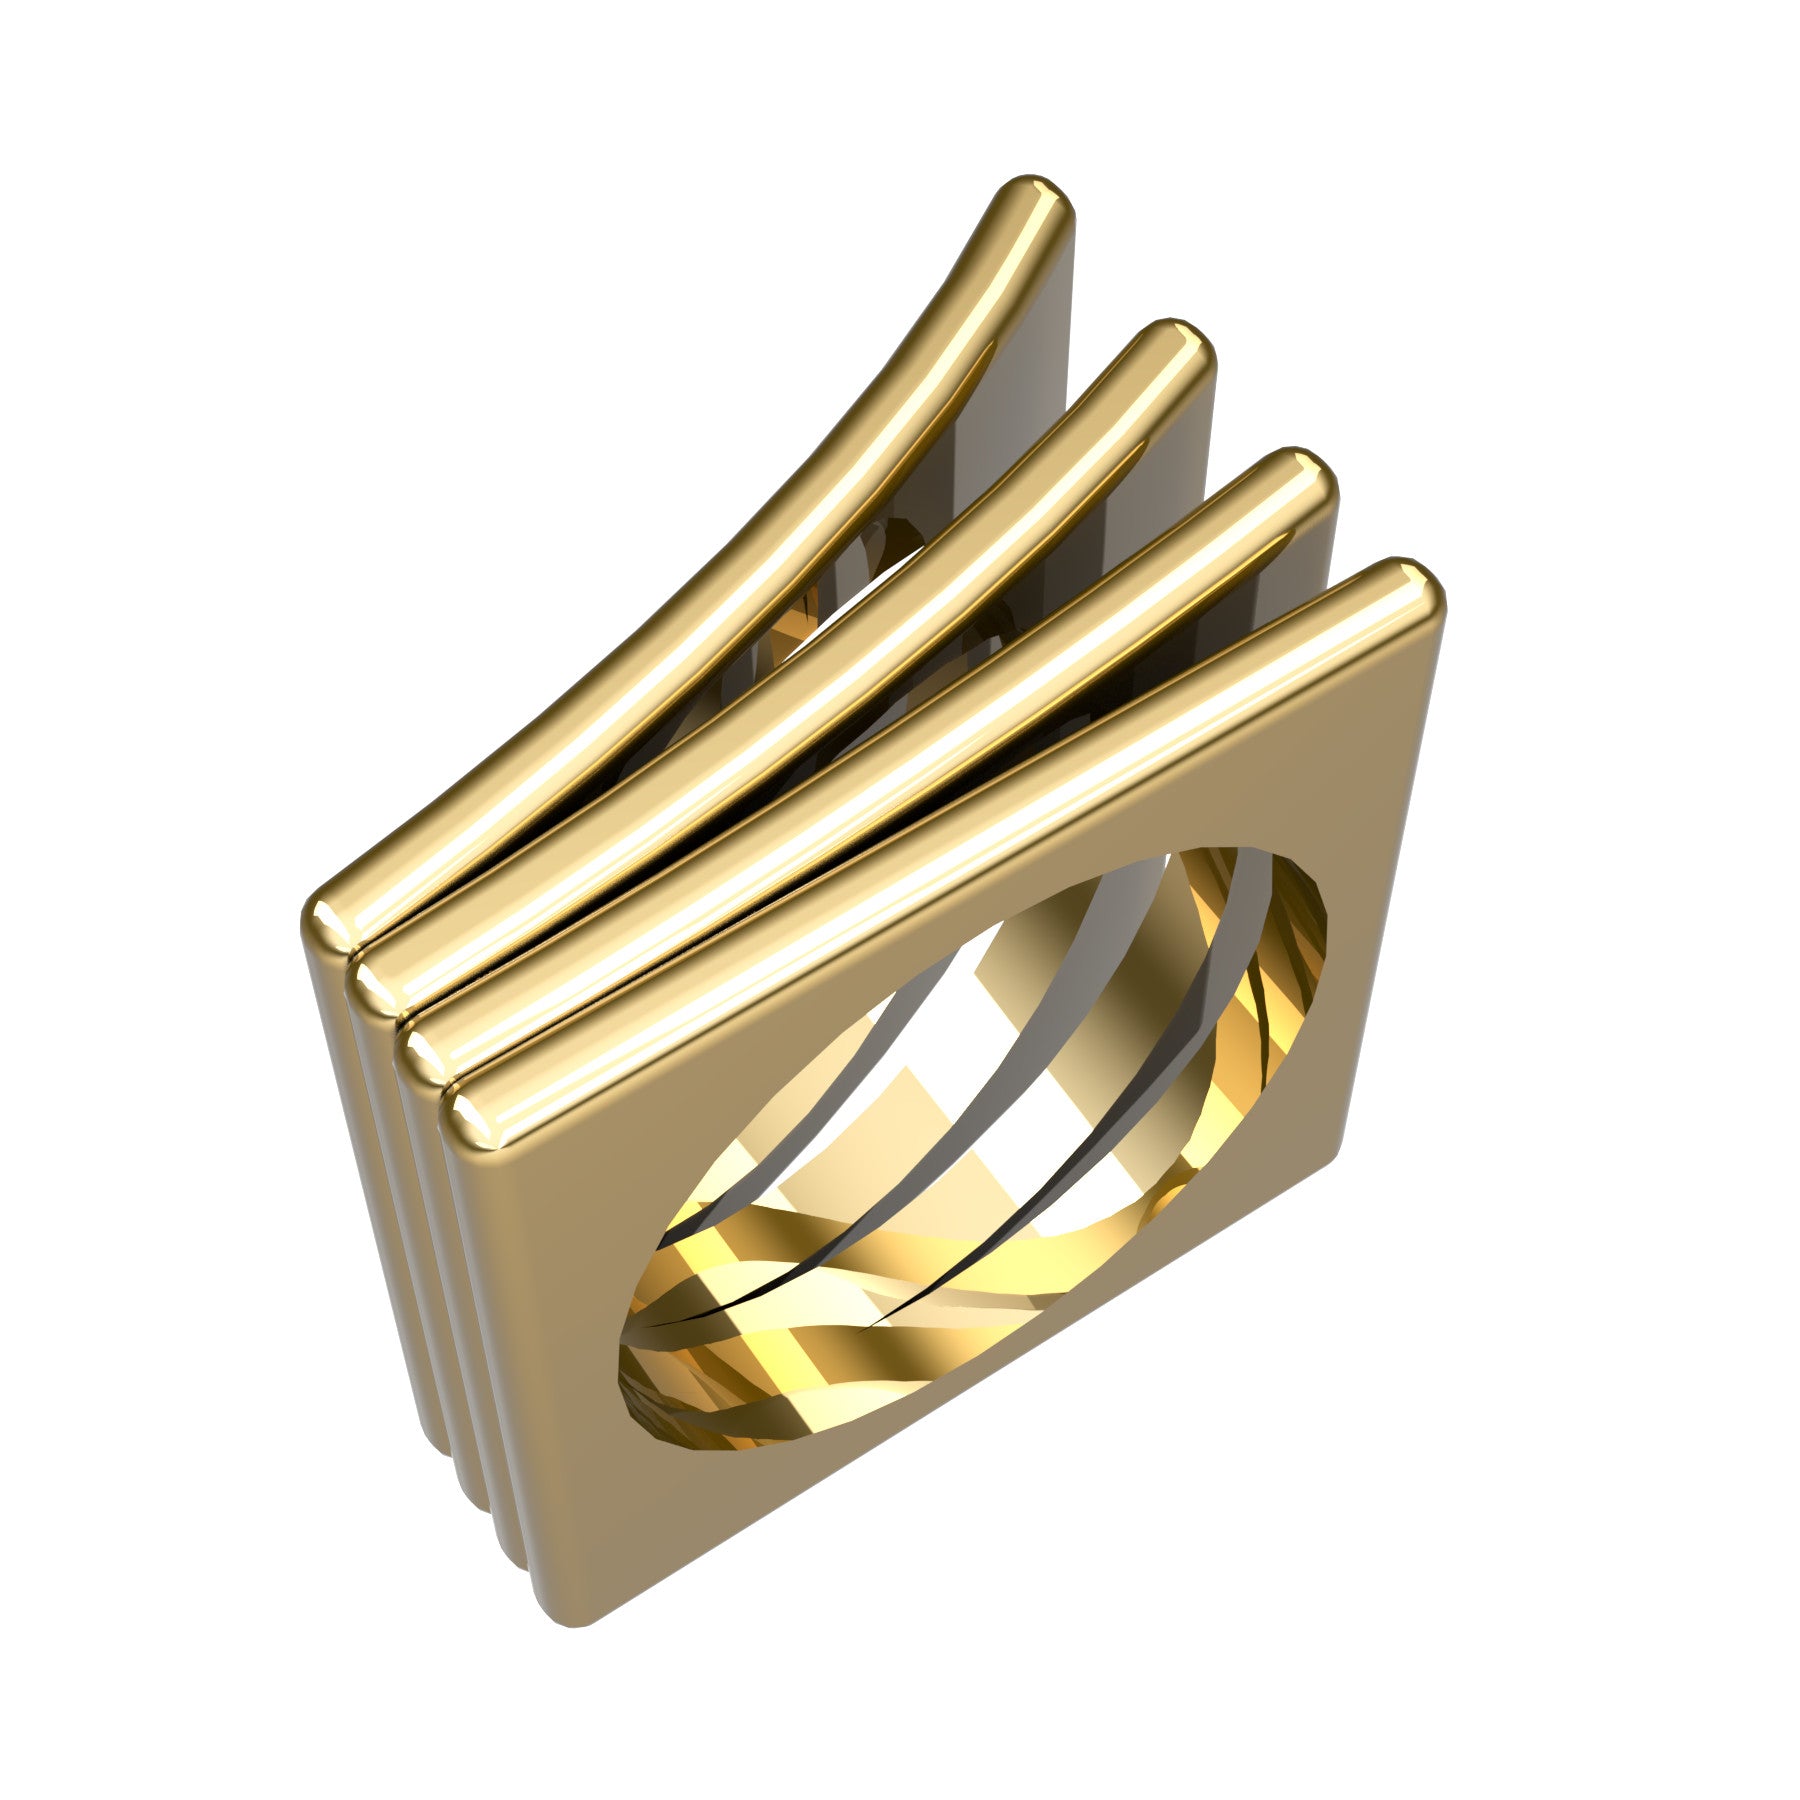 band ring, 18 K yellow gold, weight about 20,8 g. (0,73 oz), width 8,7 mm max